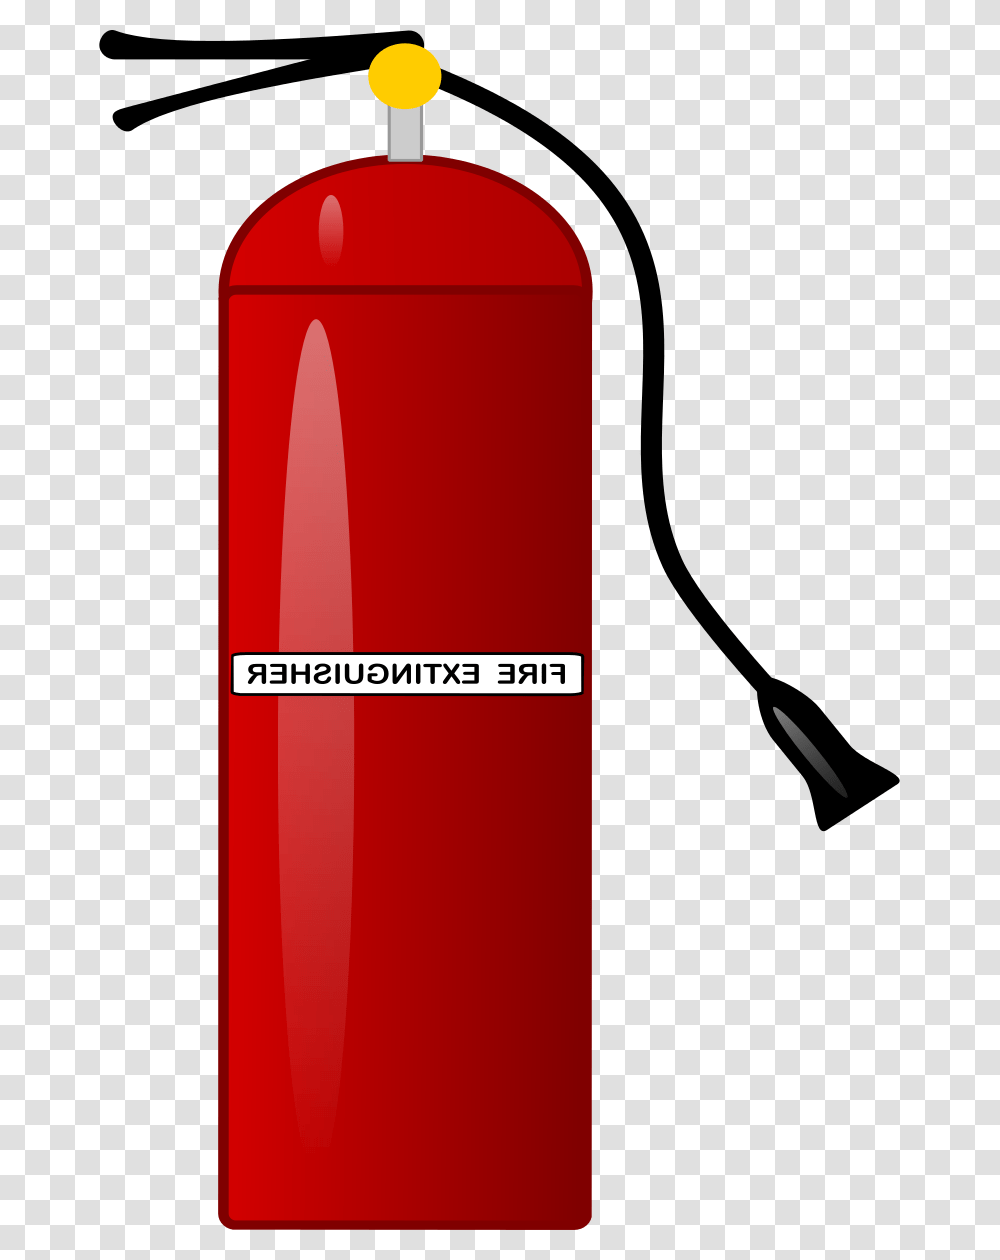 Stock Alarm Cliparthot Of And Fire Extinguisher Clipart, Bottle, Gas Pump, Machine, Beverage Transparent Png